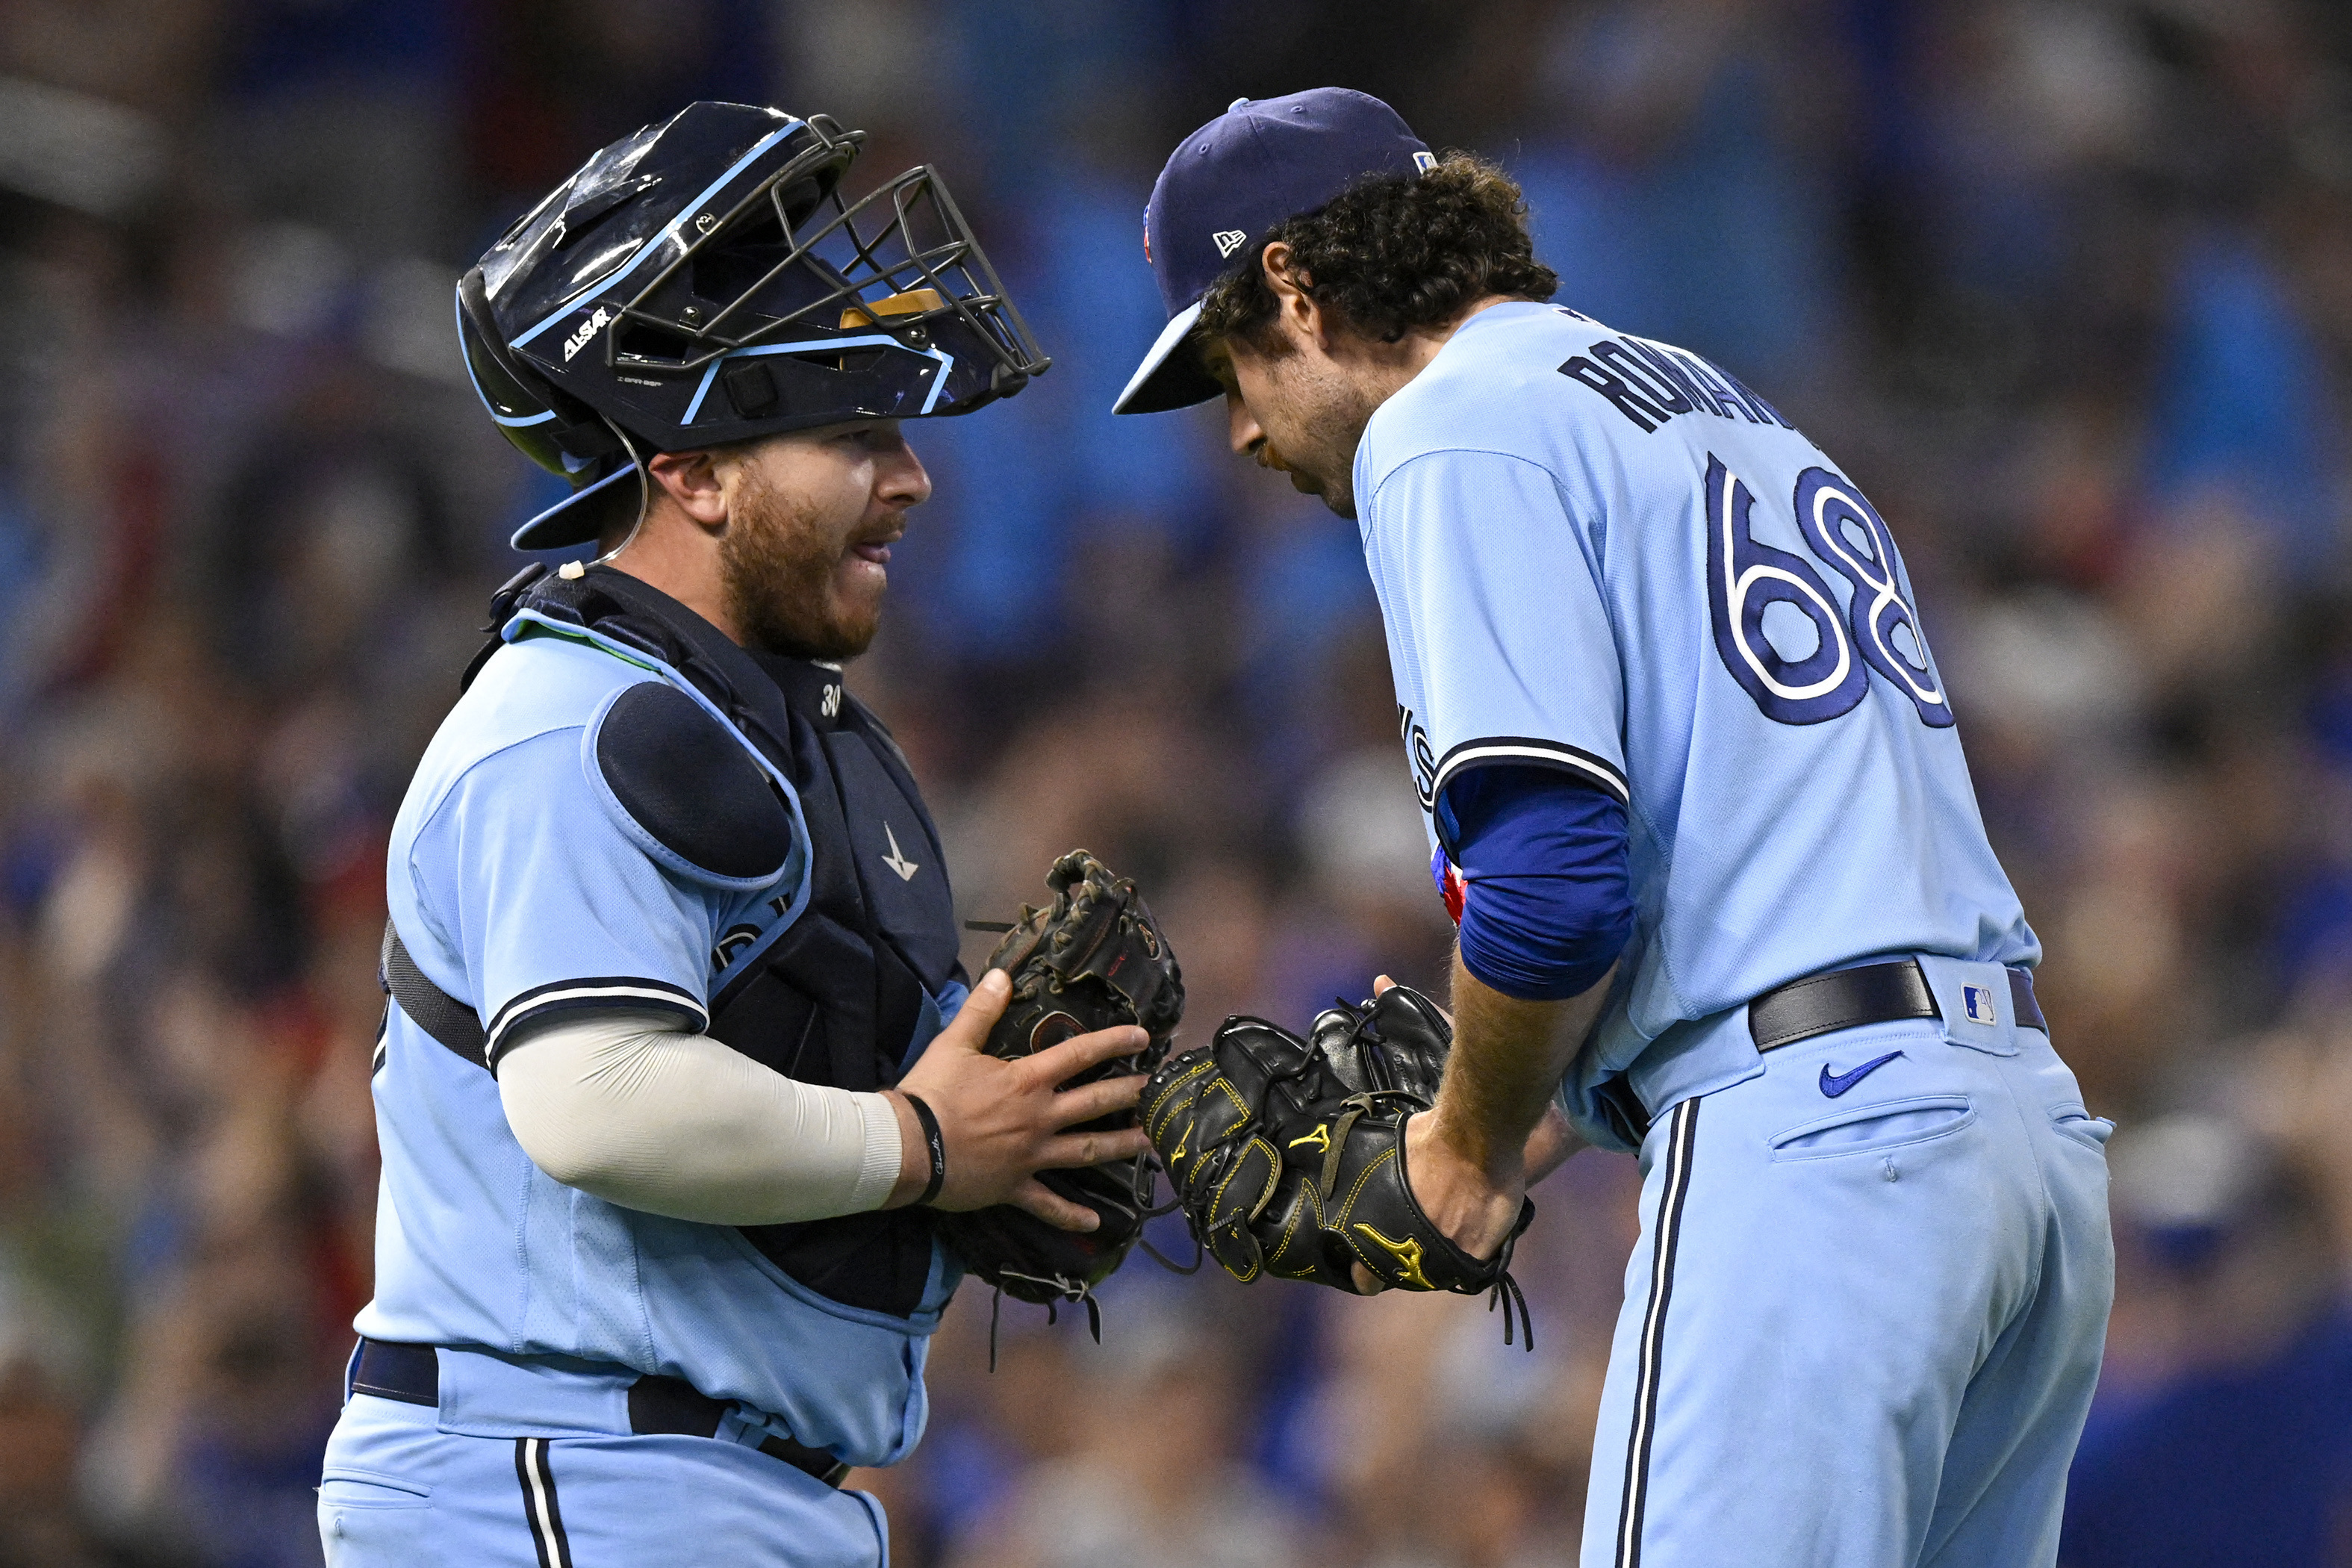 Kevin Kiermaier's two extra-base hits lift Jays past Twins